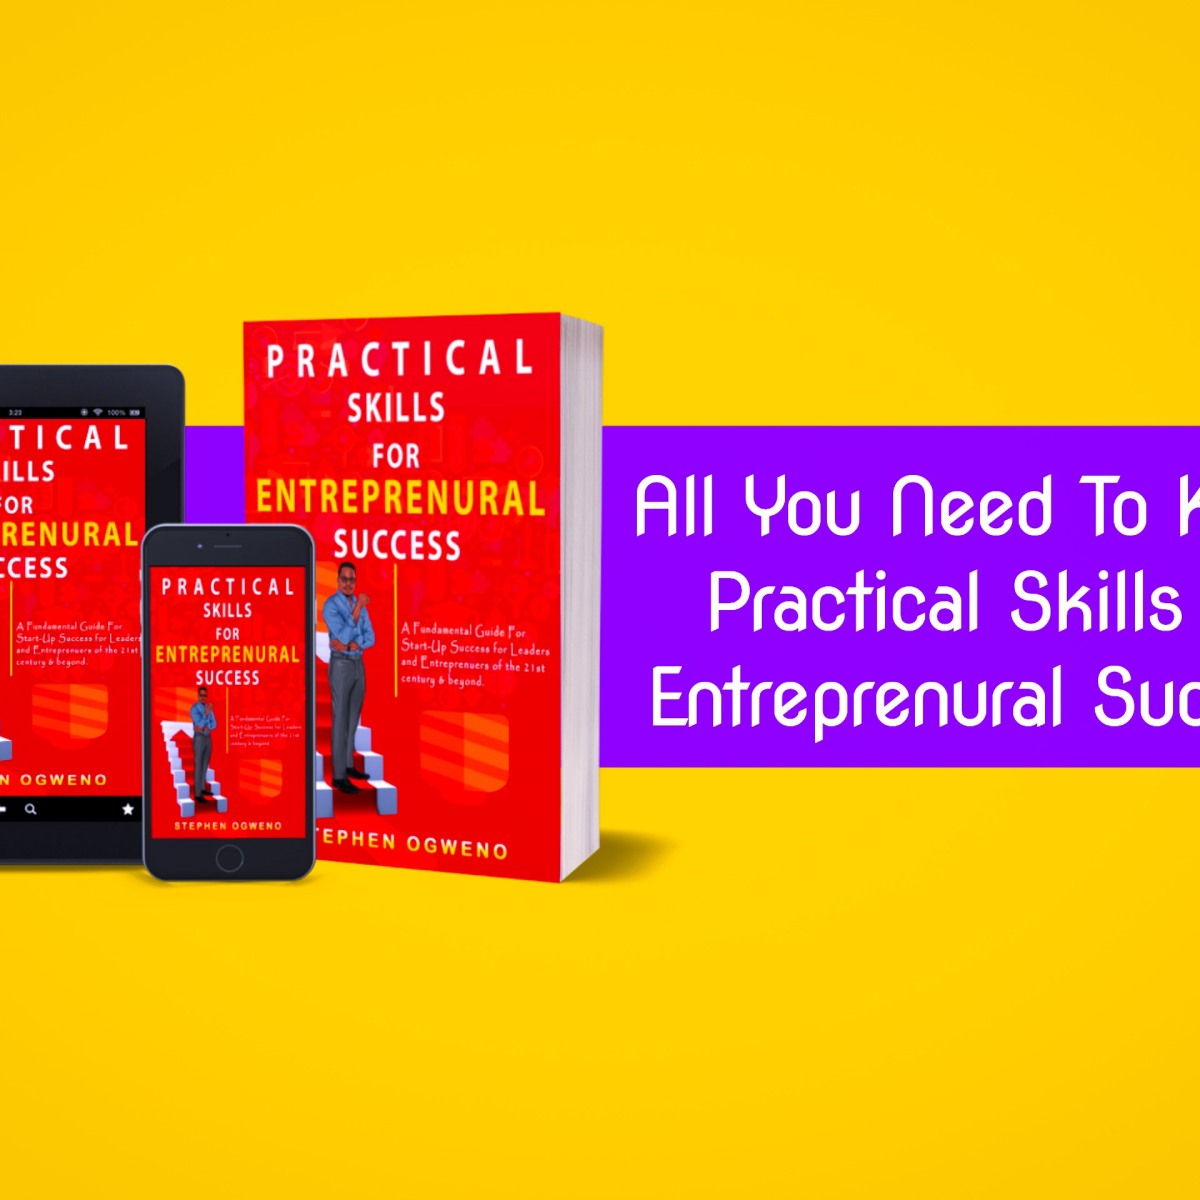 PRACTICAL SKILLS FOR ENTREPRENEURIAL SUCCESS BY STEPHEN OGWENO : BOOK LAUNCH, CURRENT PROGRESS AND ALL YOU NEED TO KNOW